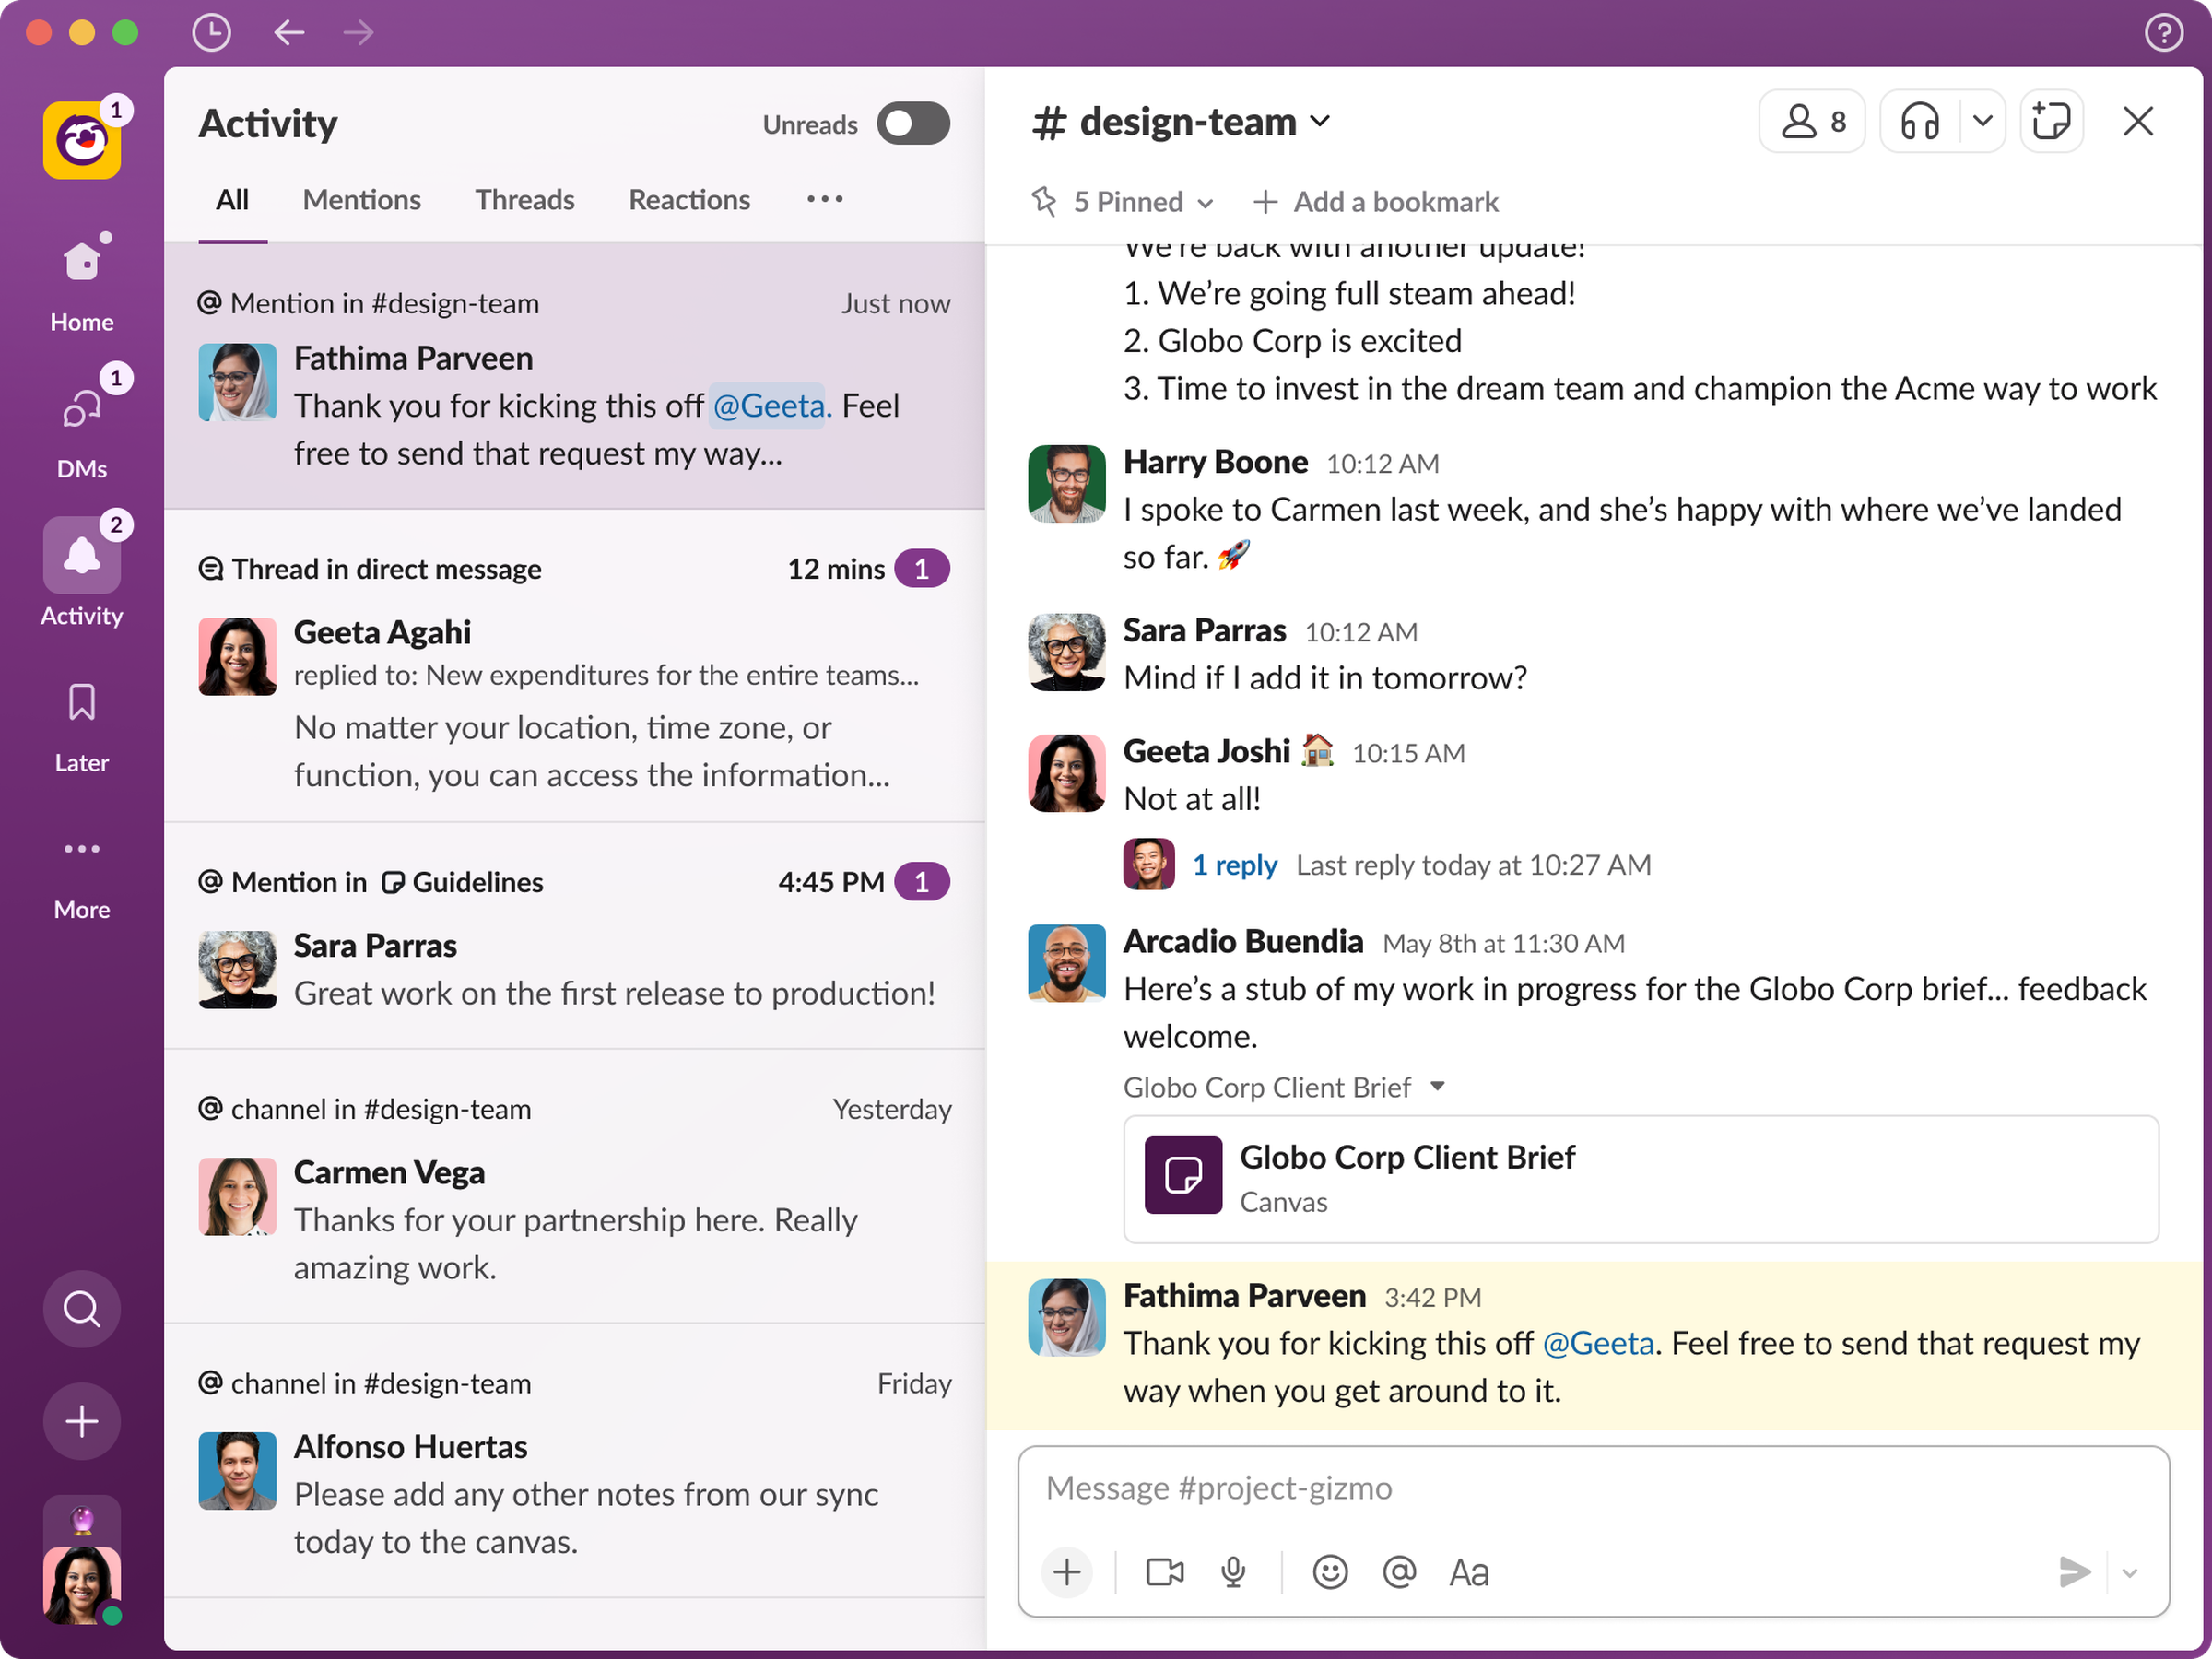 A screenshot of the Activity feed in Slack, showing all recent mentions.